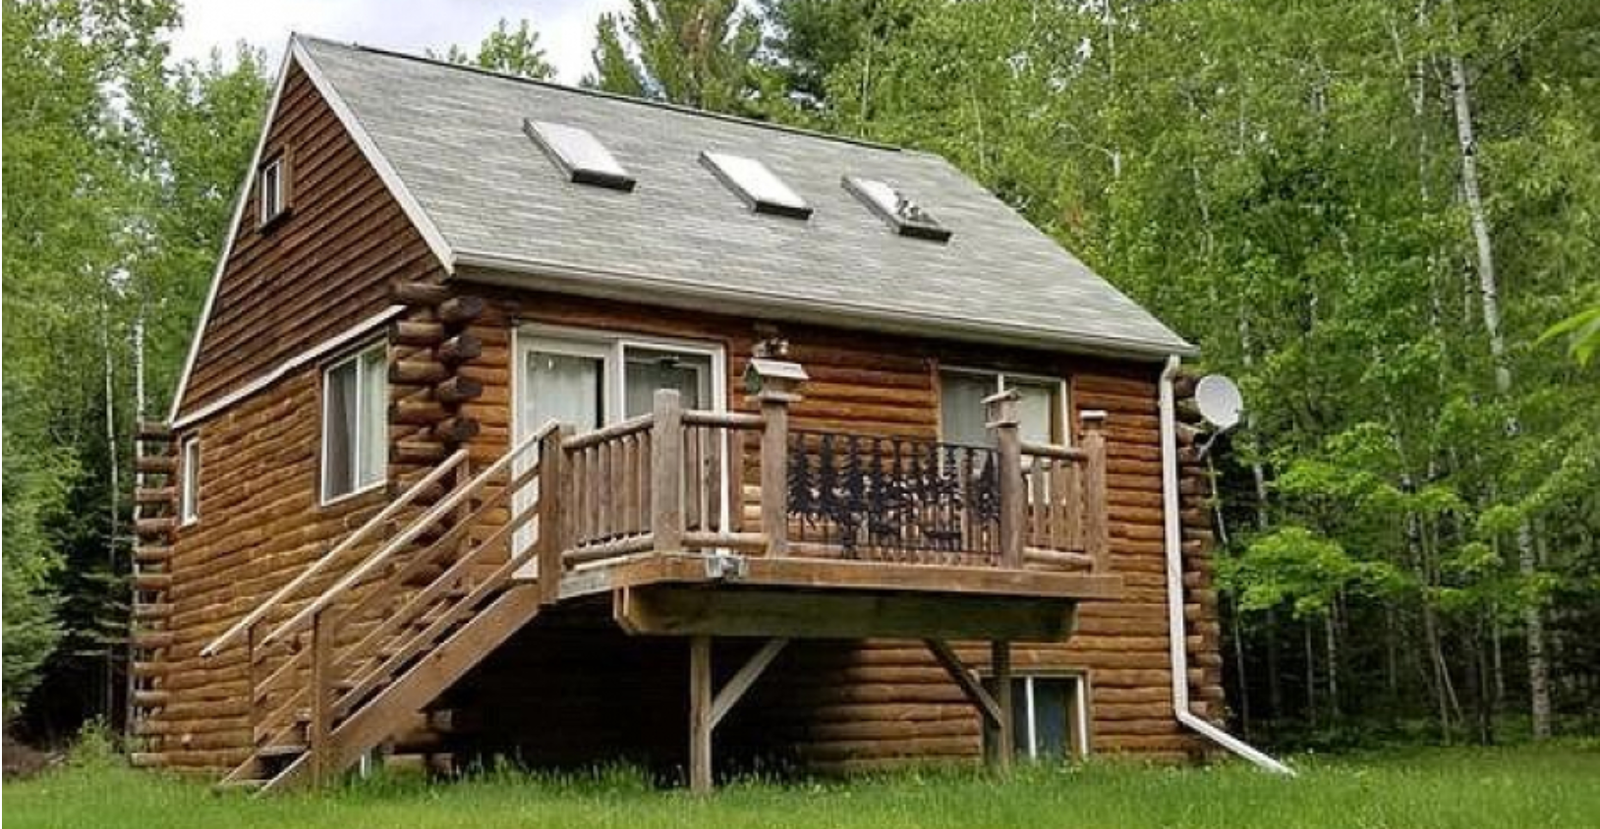 Log Cabin On 20 Acres In Wisconsin For $157K – Two Car Detached Garage!